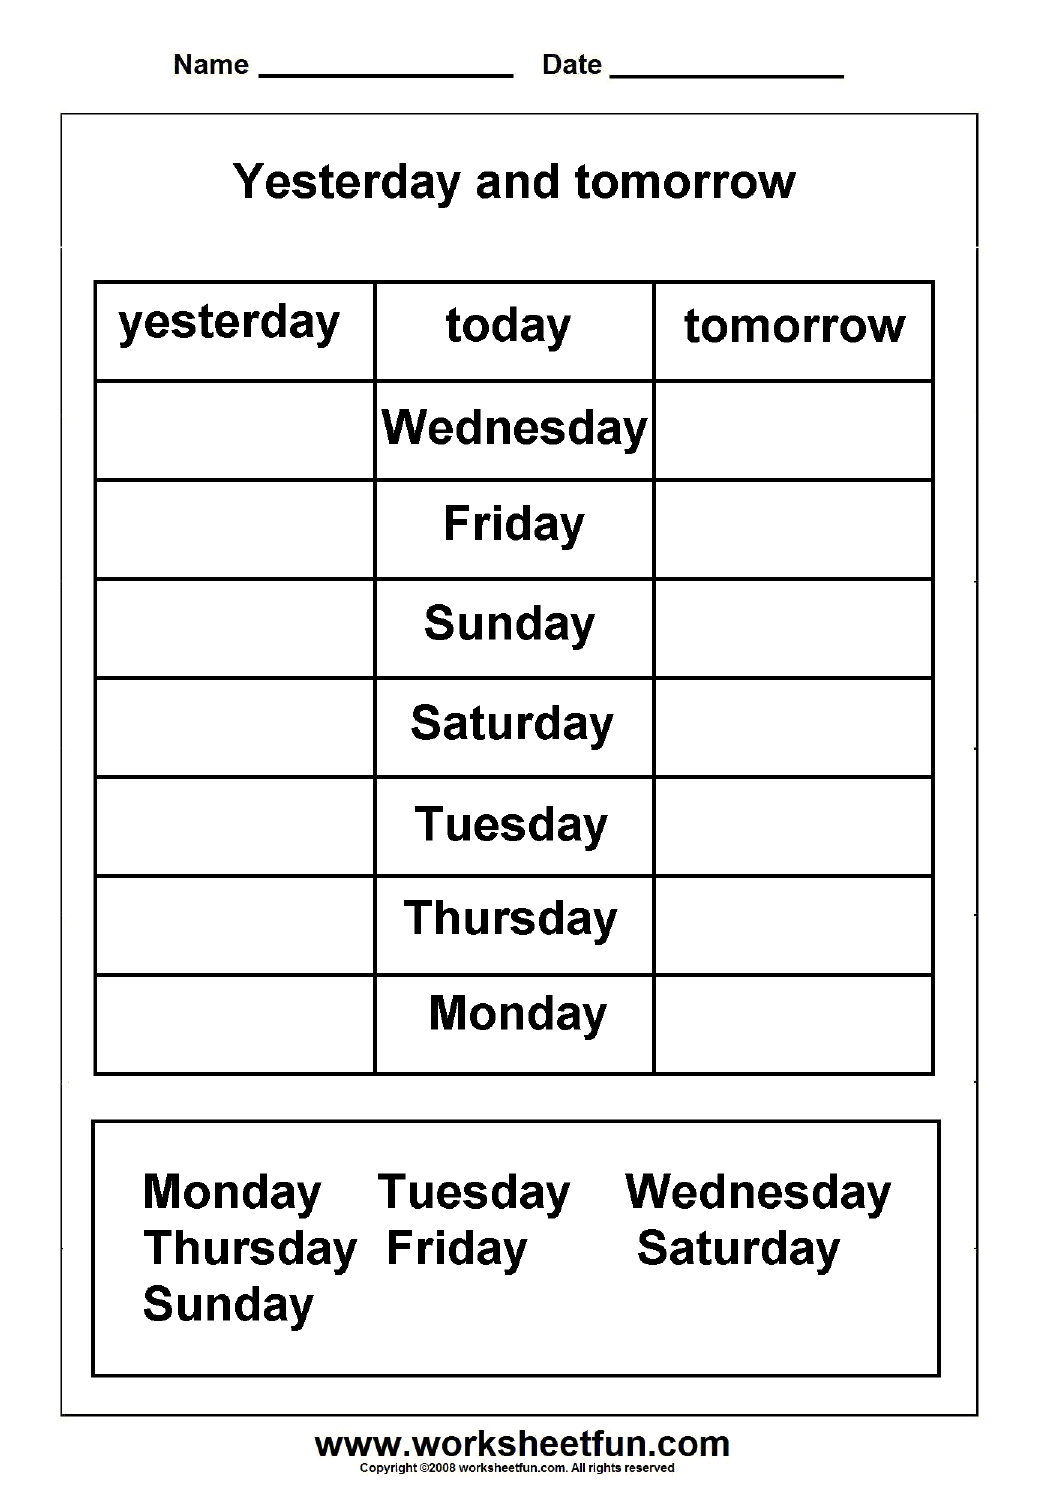 Days Of The Week And Months Of The Year Worksheets